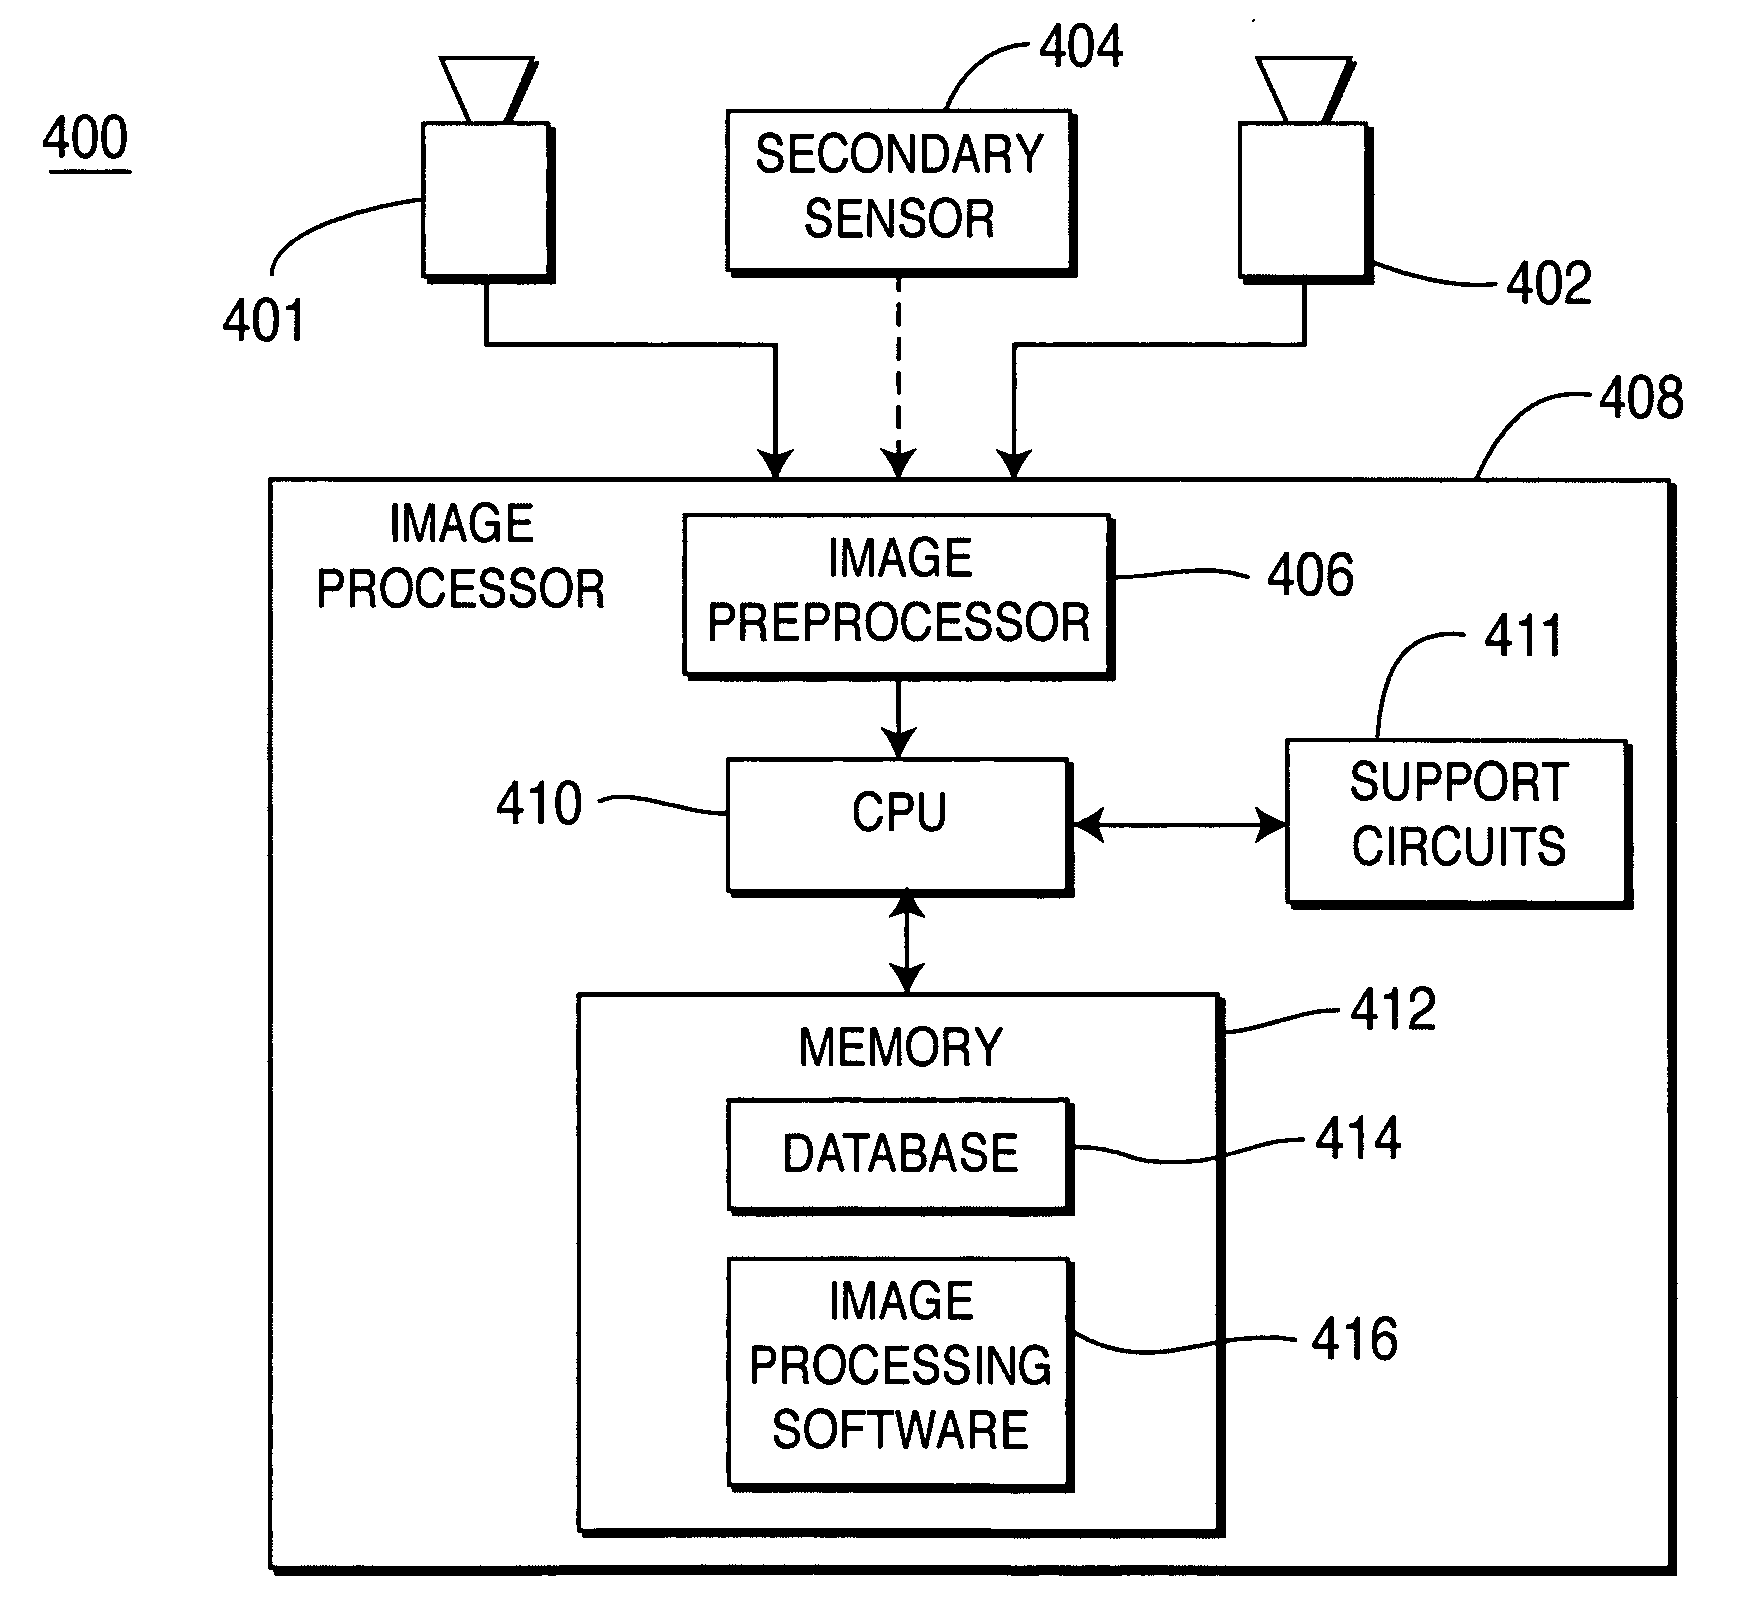 Method and apparatus for testing stereo vision methods using stereo imagery data